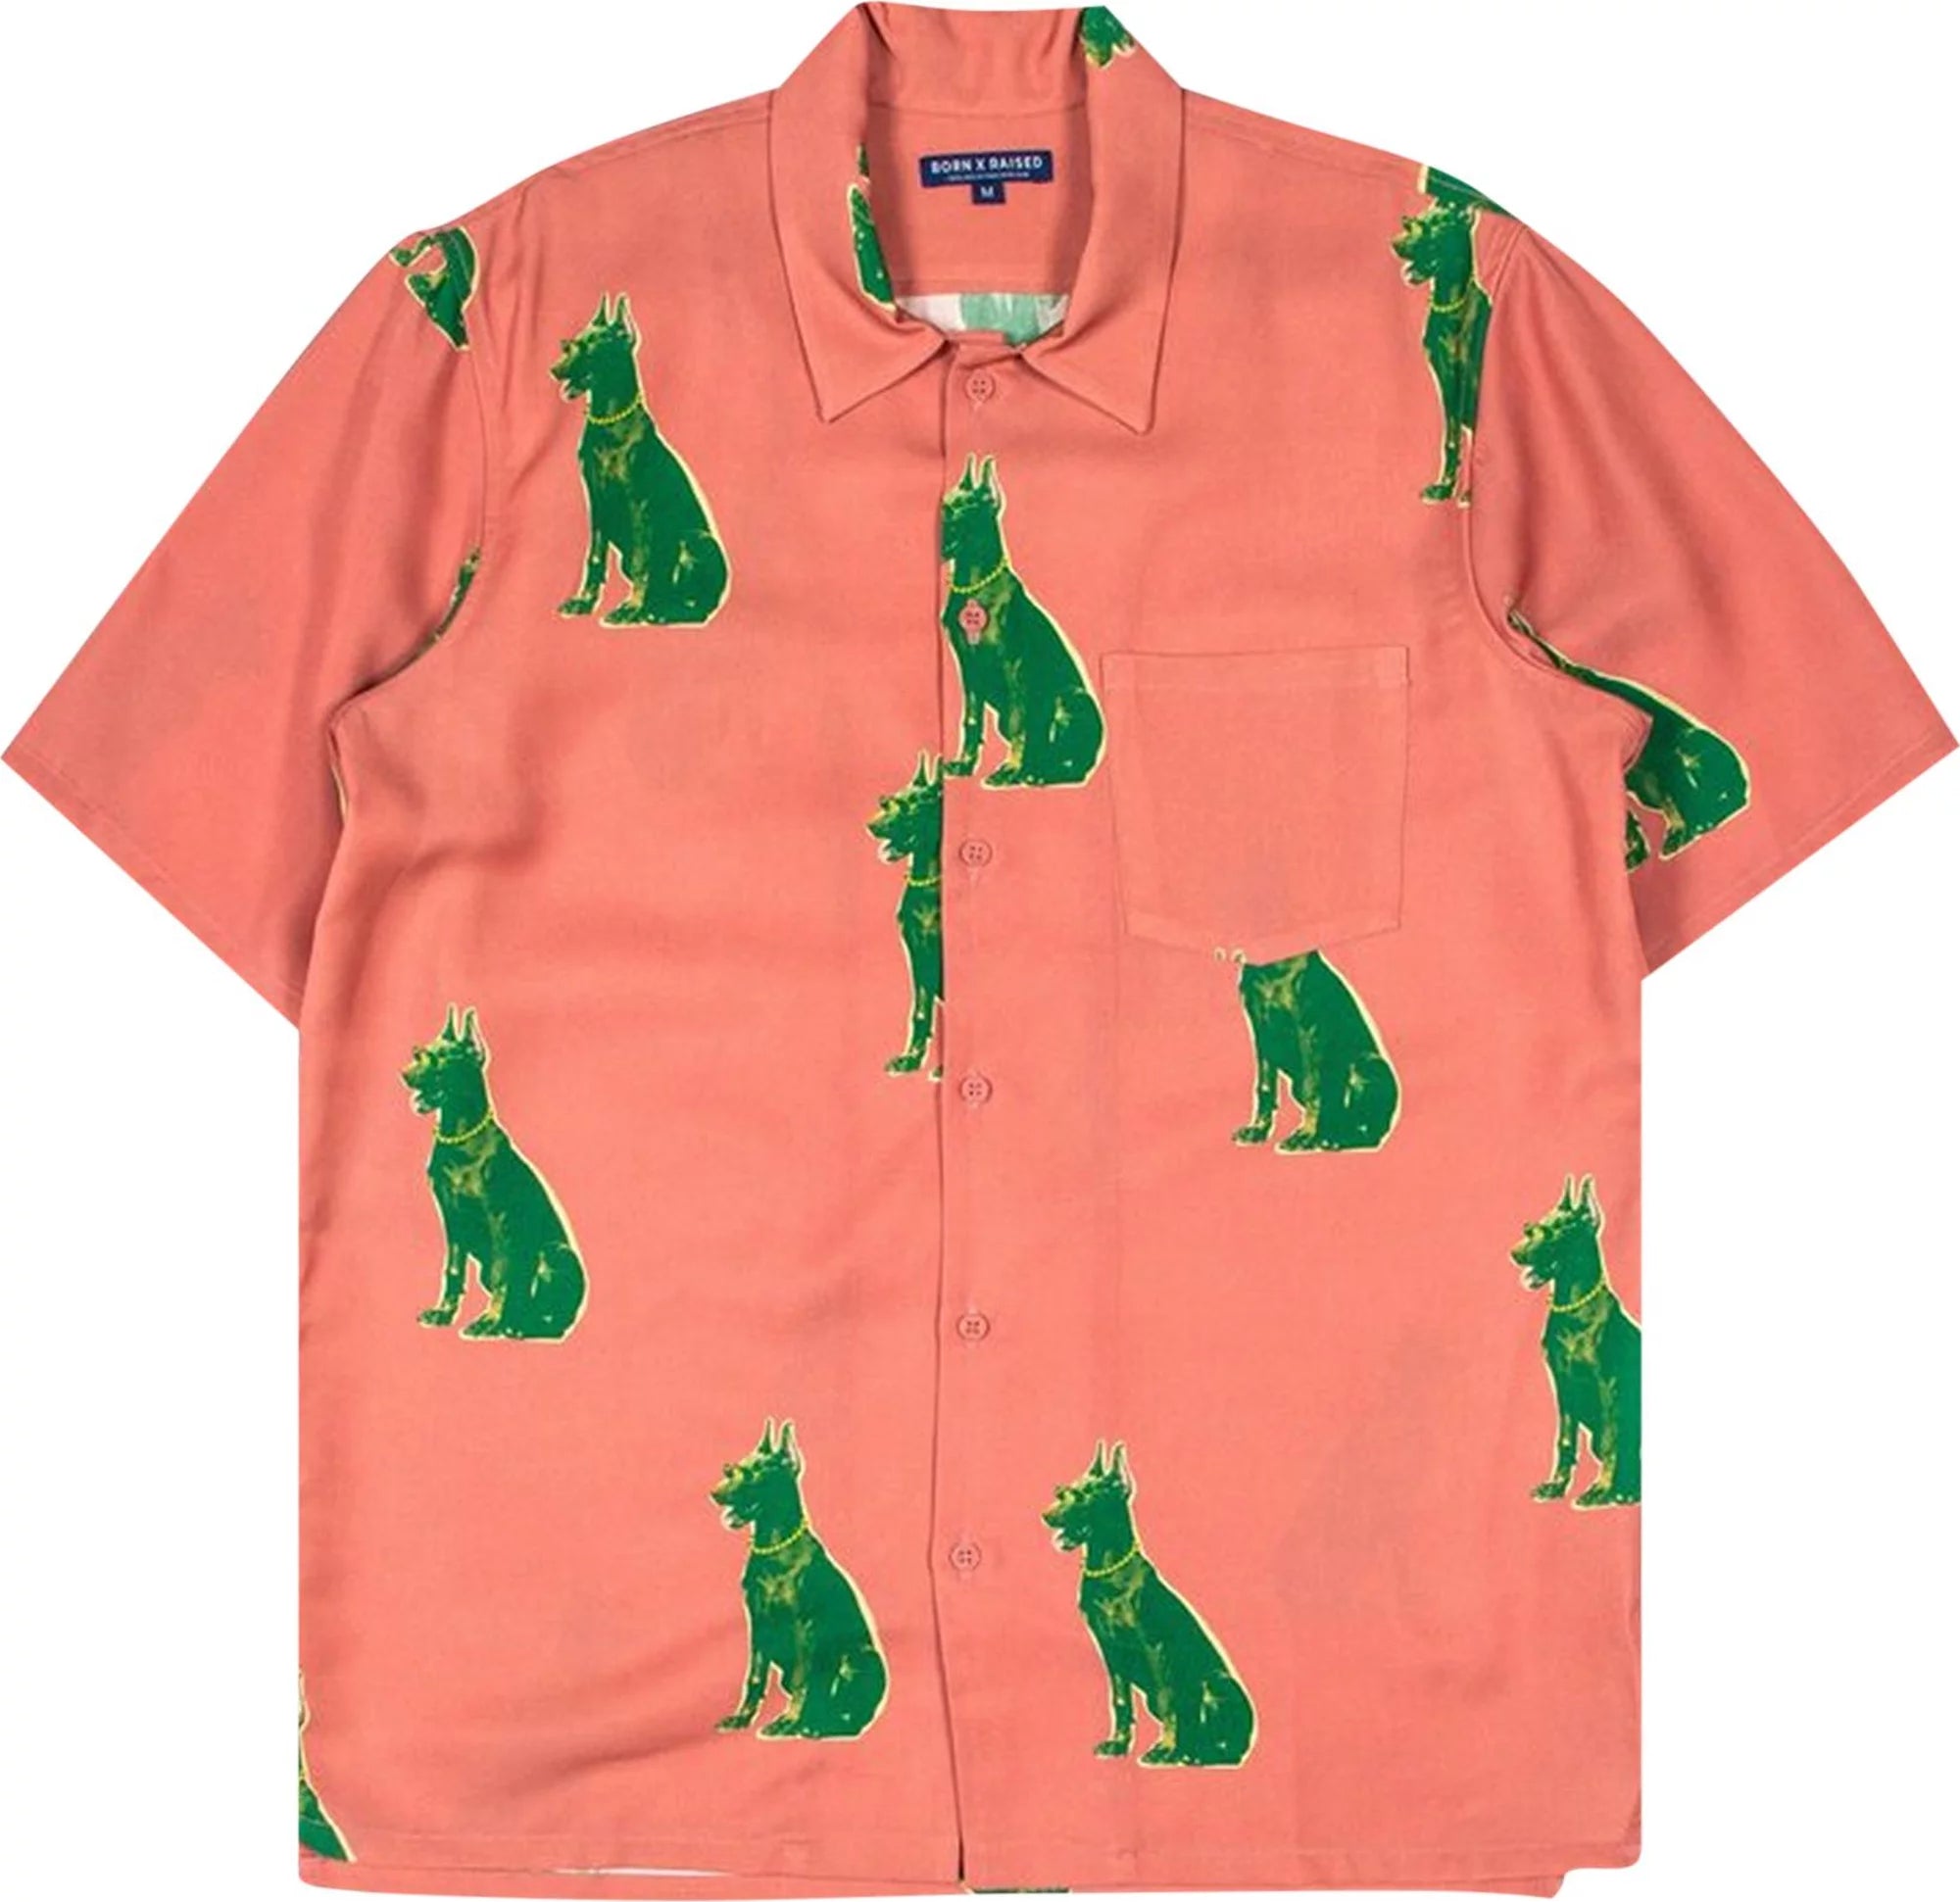 Darius Button Up Shirt in Dusty Rose Pink with Green Dogs